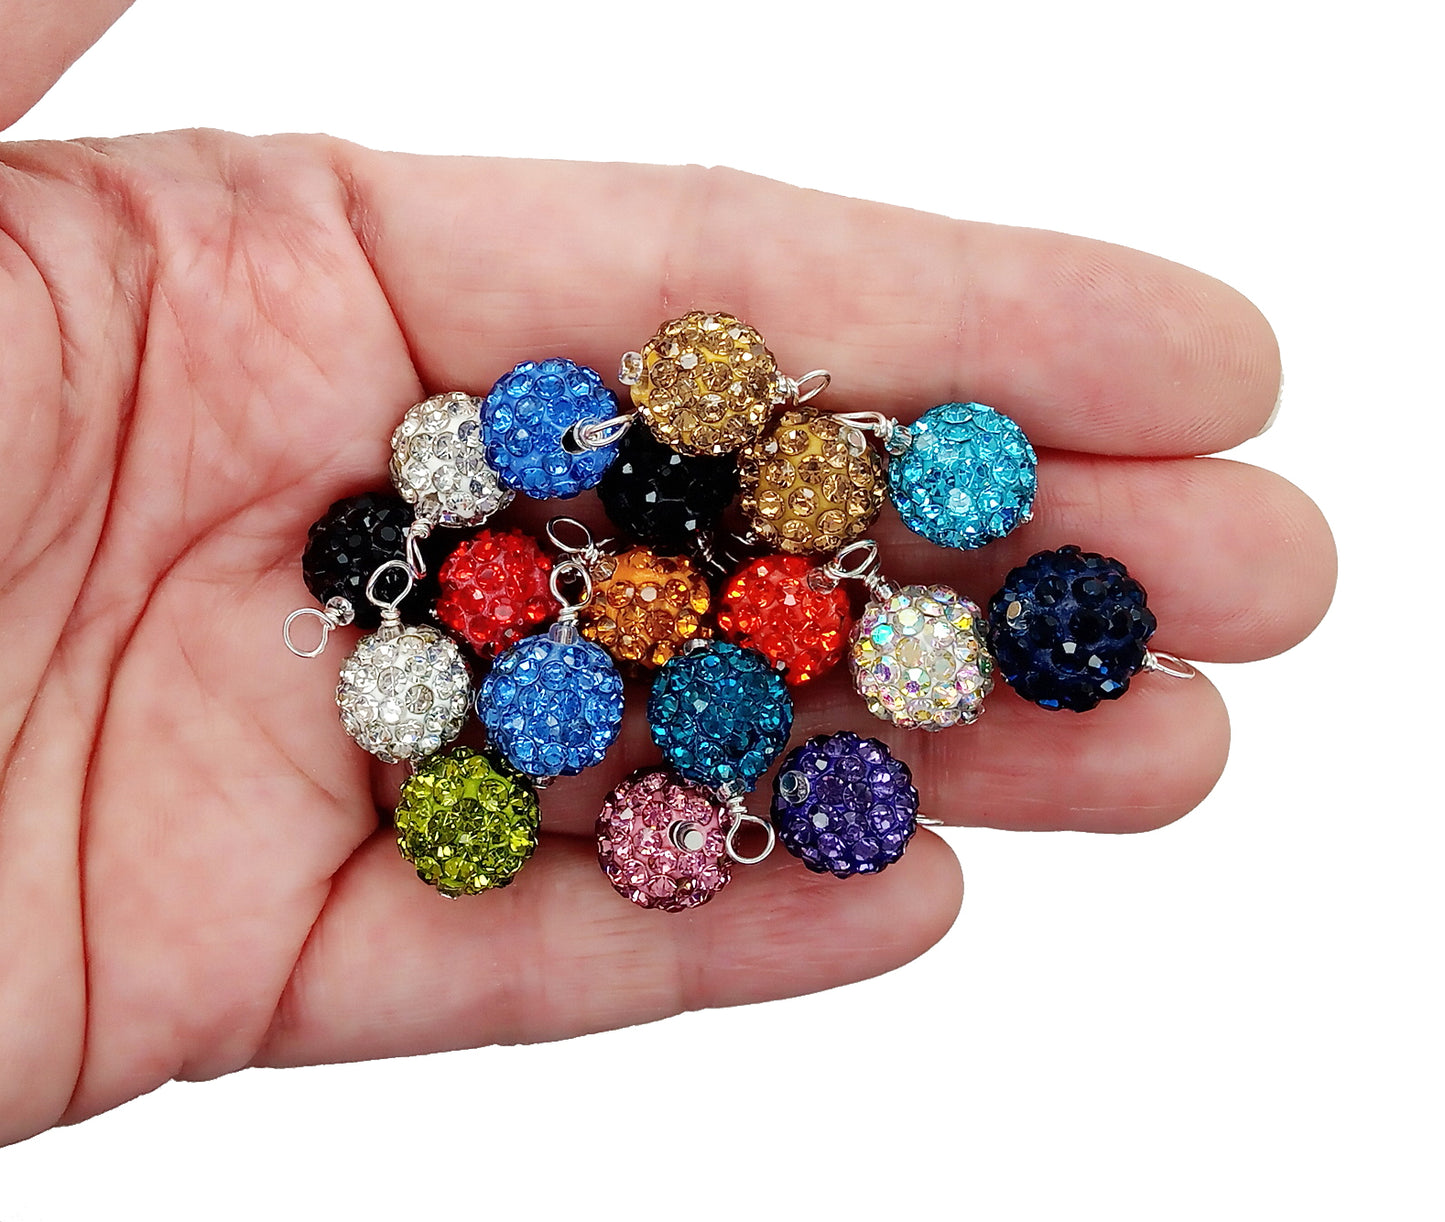 Rhinestone Bead Dangles, Colorful Sparkly Disco Ball Charms